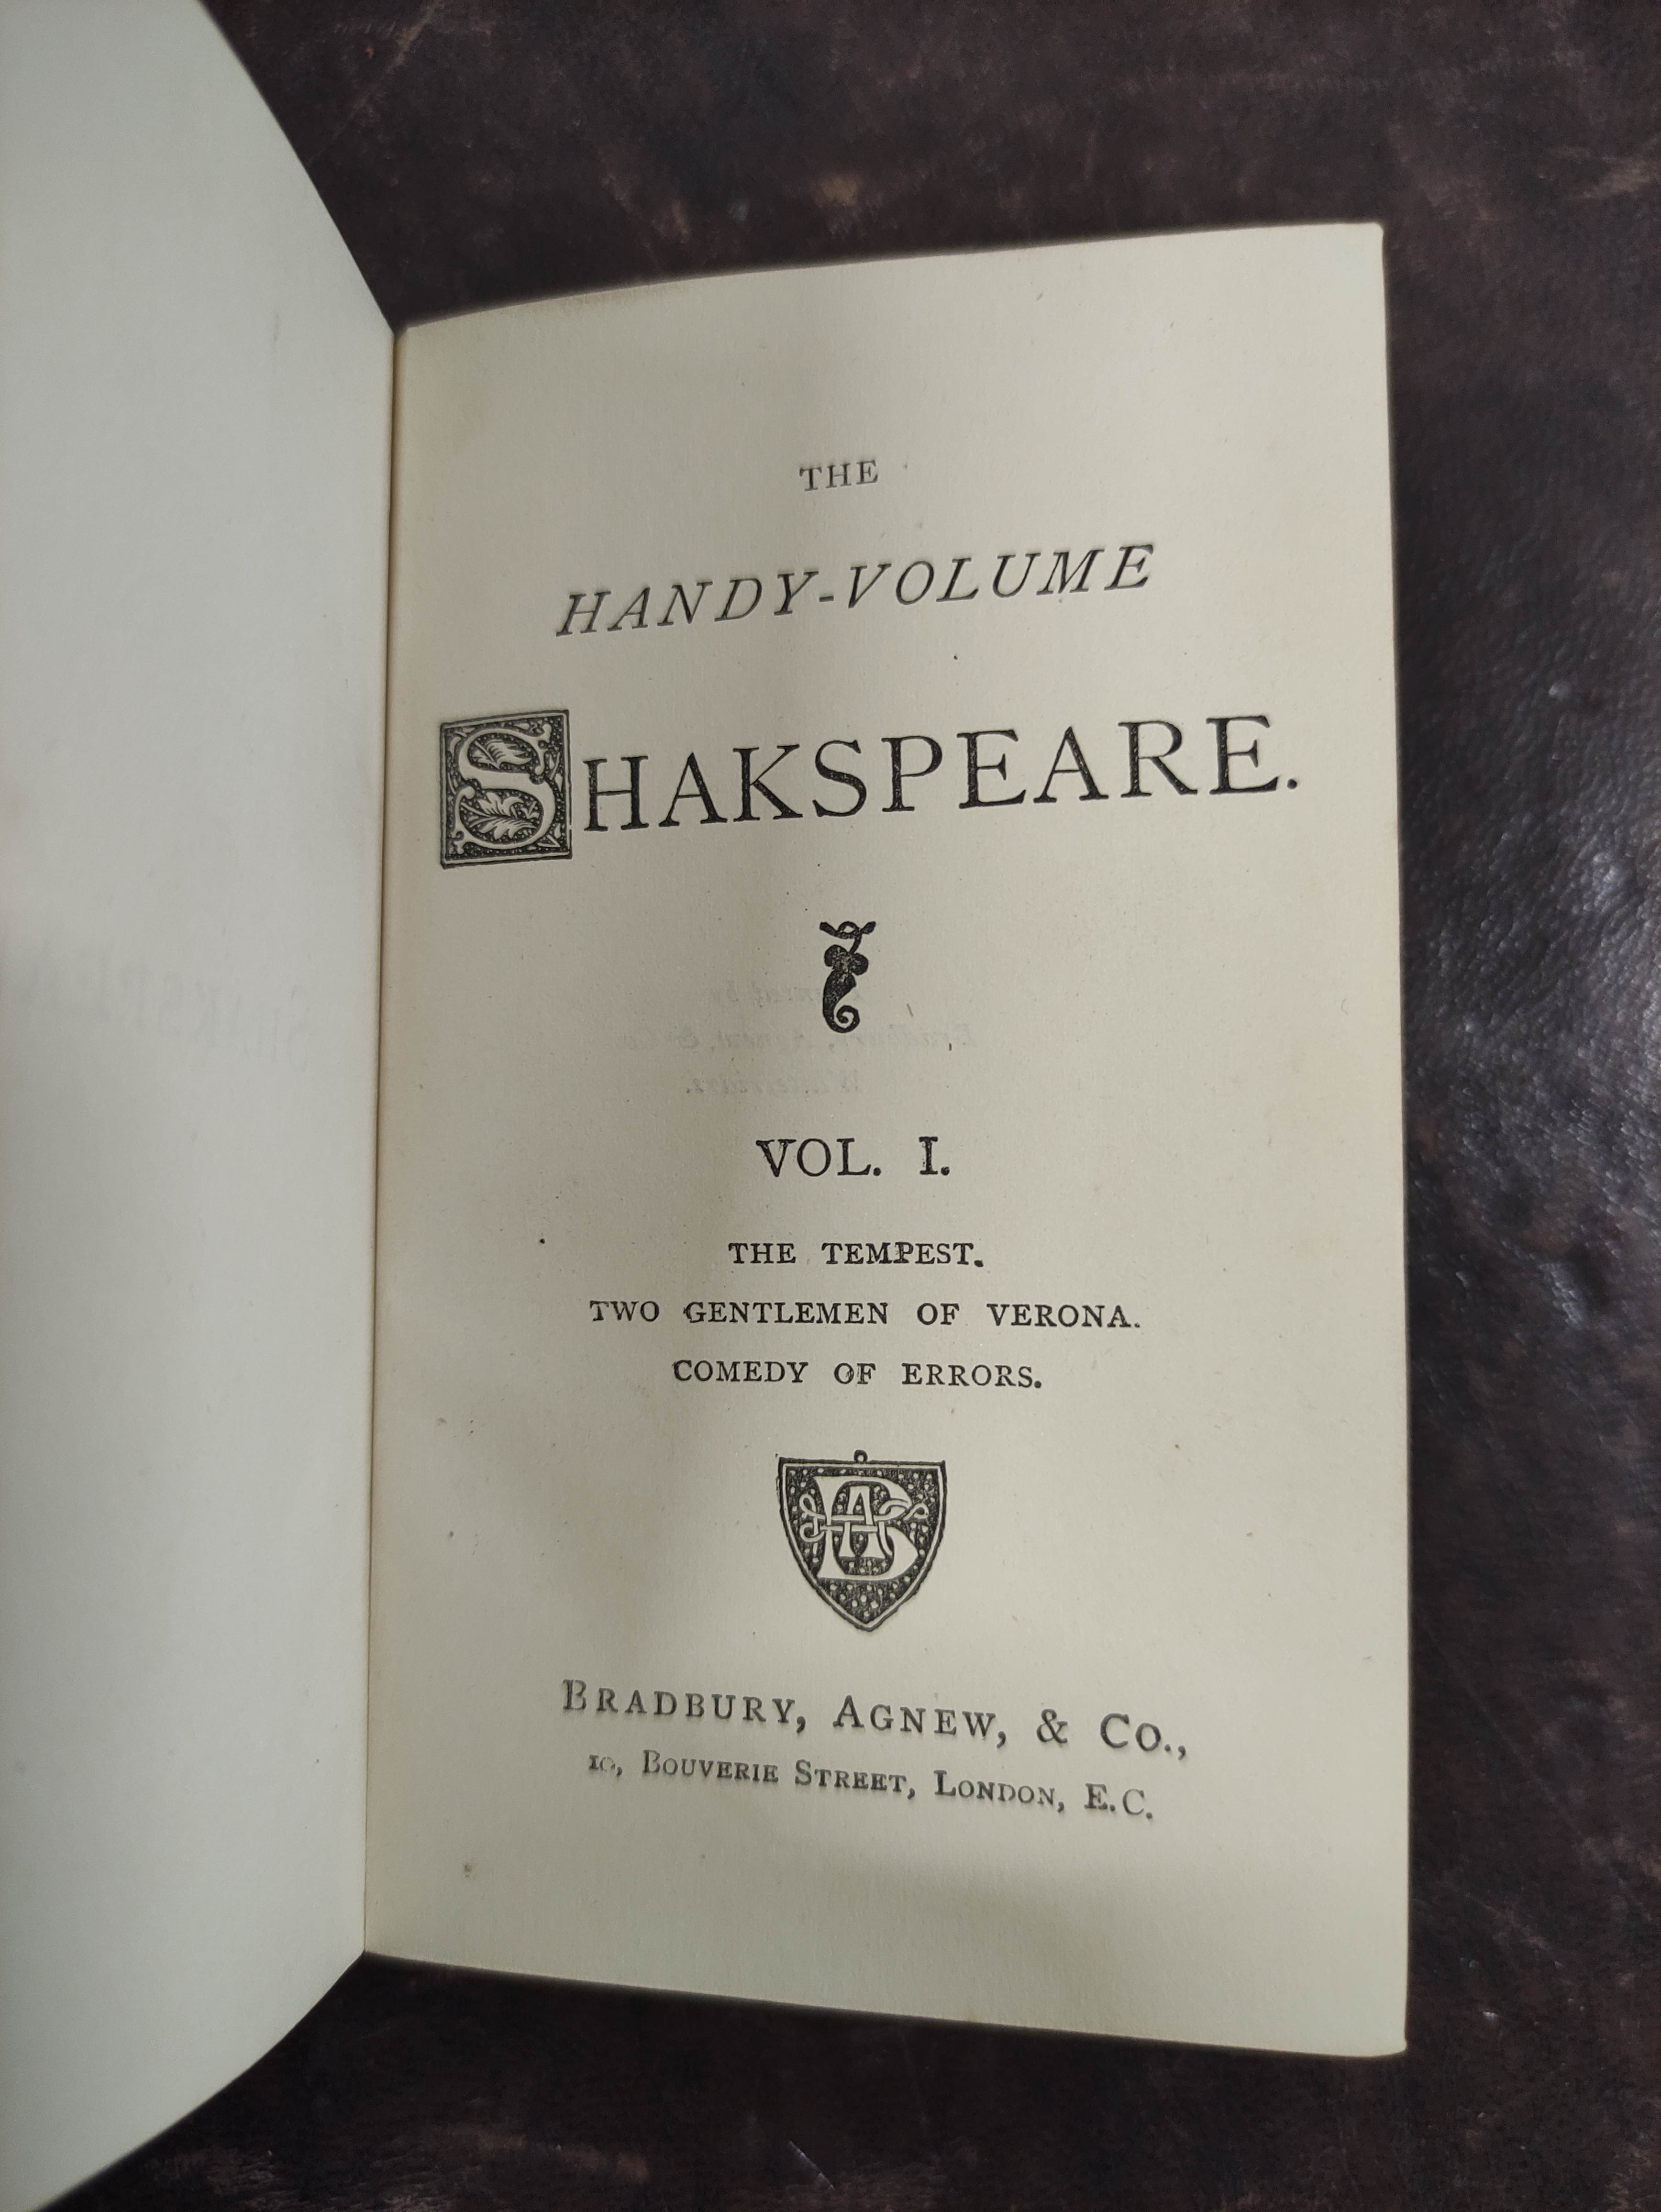 SHAKESPEARE WILLIAM.  The Handy-Volume Shakespeare. 13 vols. Small format. Limp red morocco, gilt - Image 2 of 3